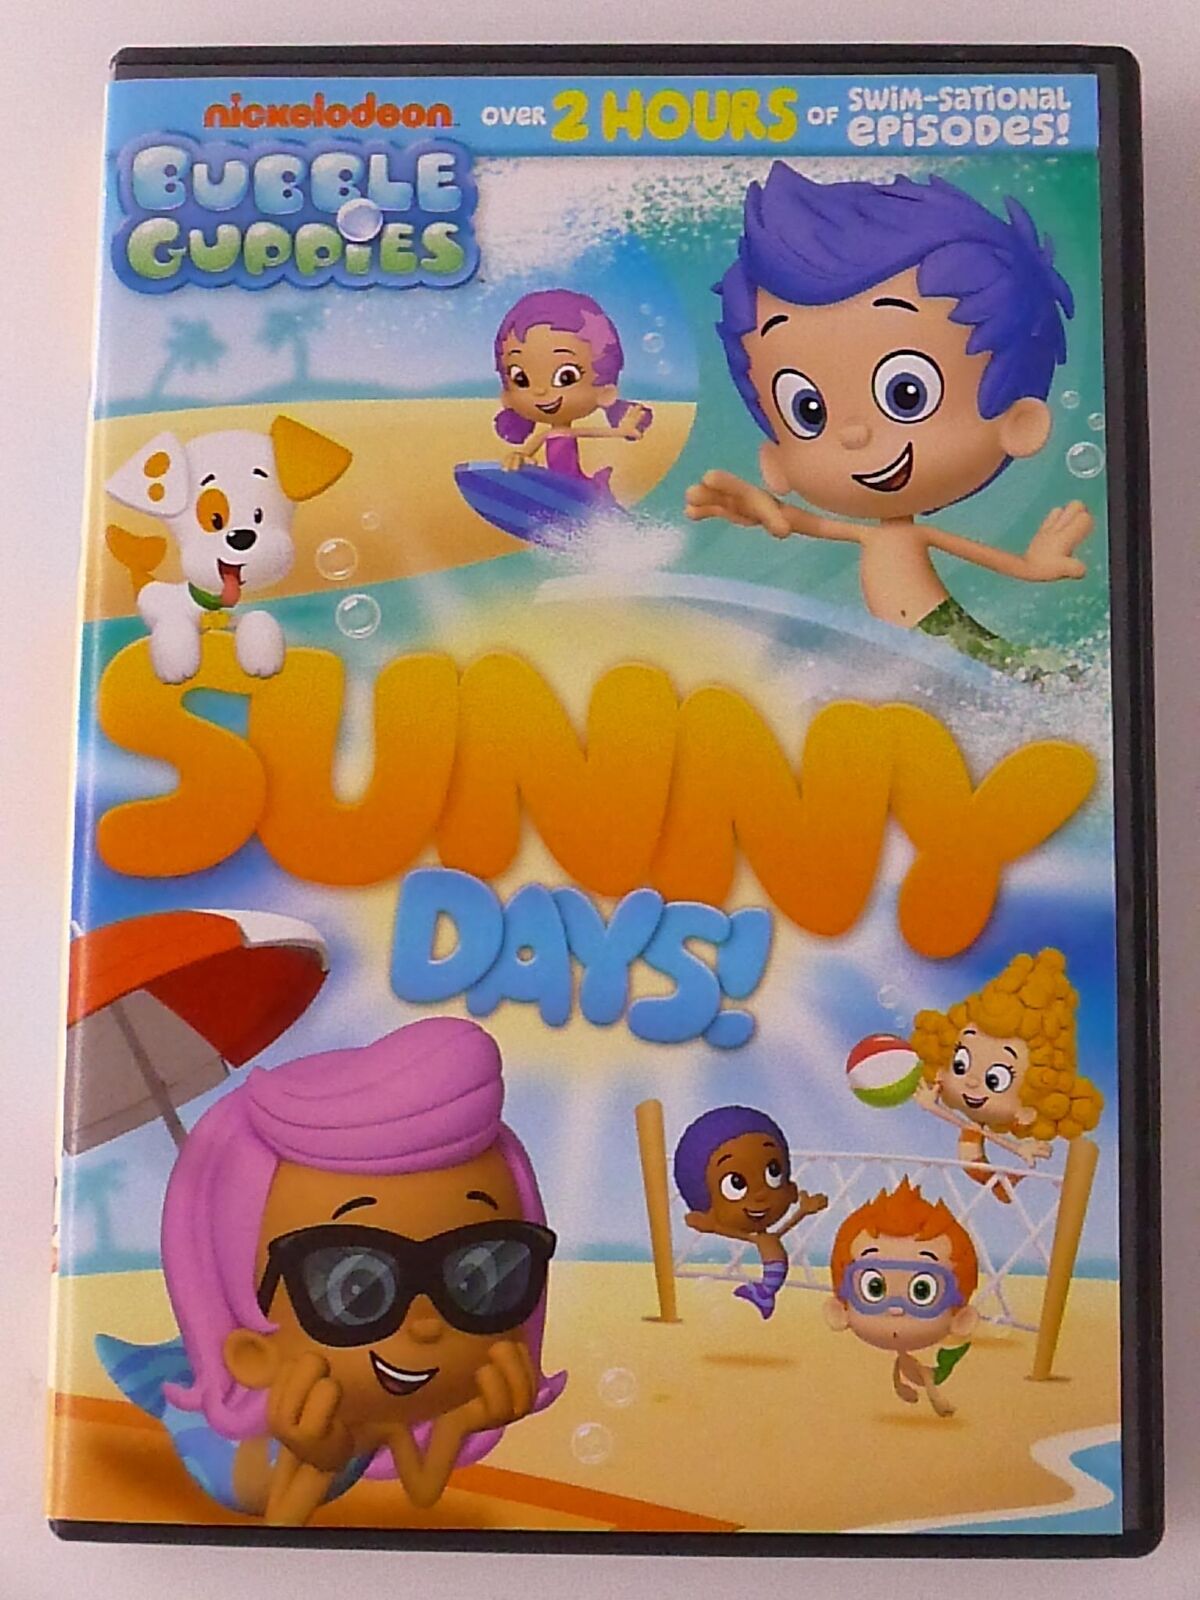 Bubble Guppies - Sunny Days (DVD, 6 episodes, Nickelodeon) - I0227